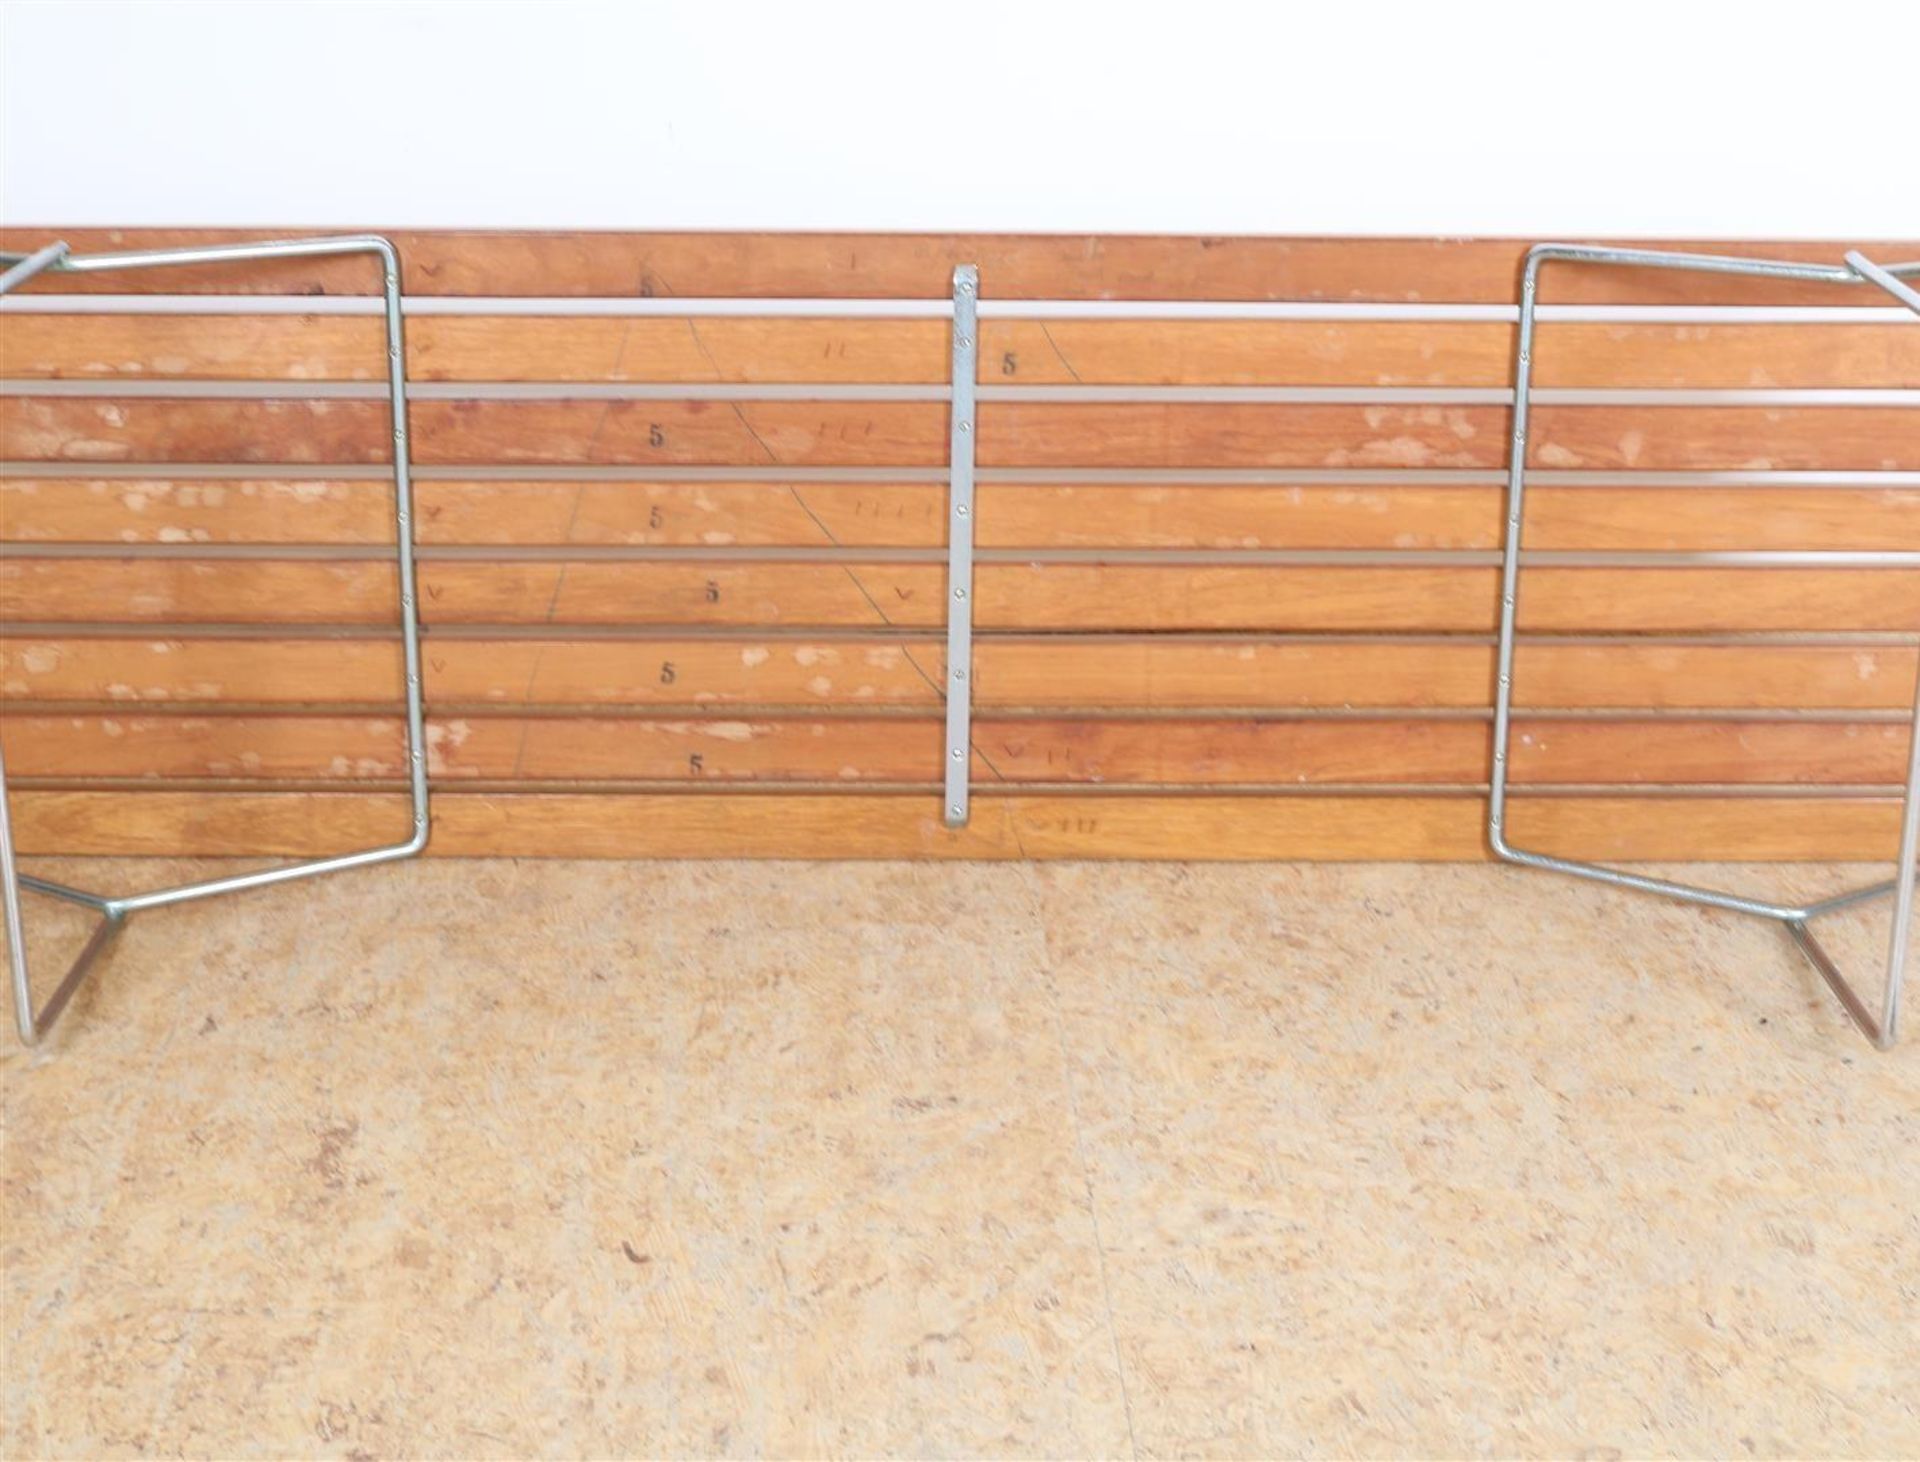 Design slatted bench with wooden oak seat on metal tubular frame legs, designed in 1952 by Harry - Image 4 of 4